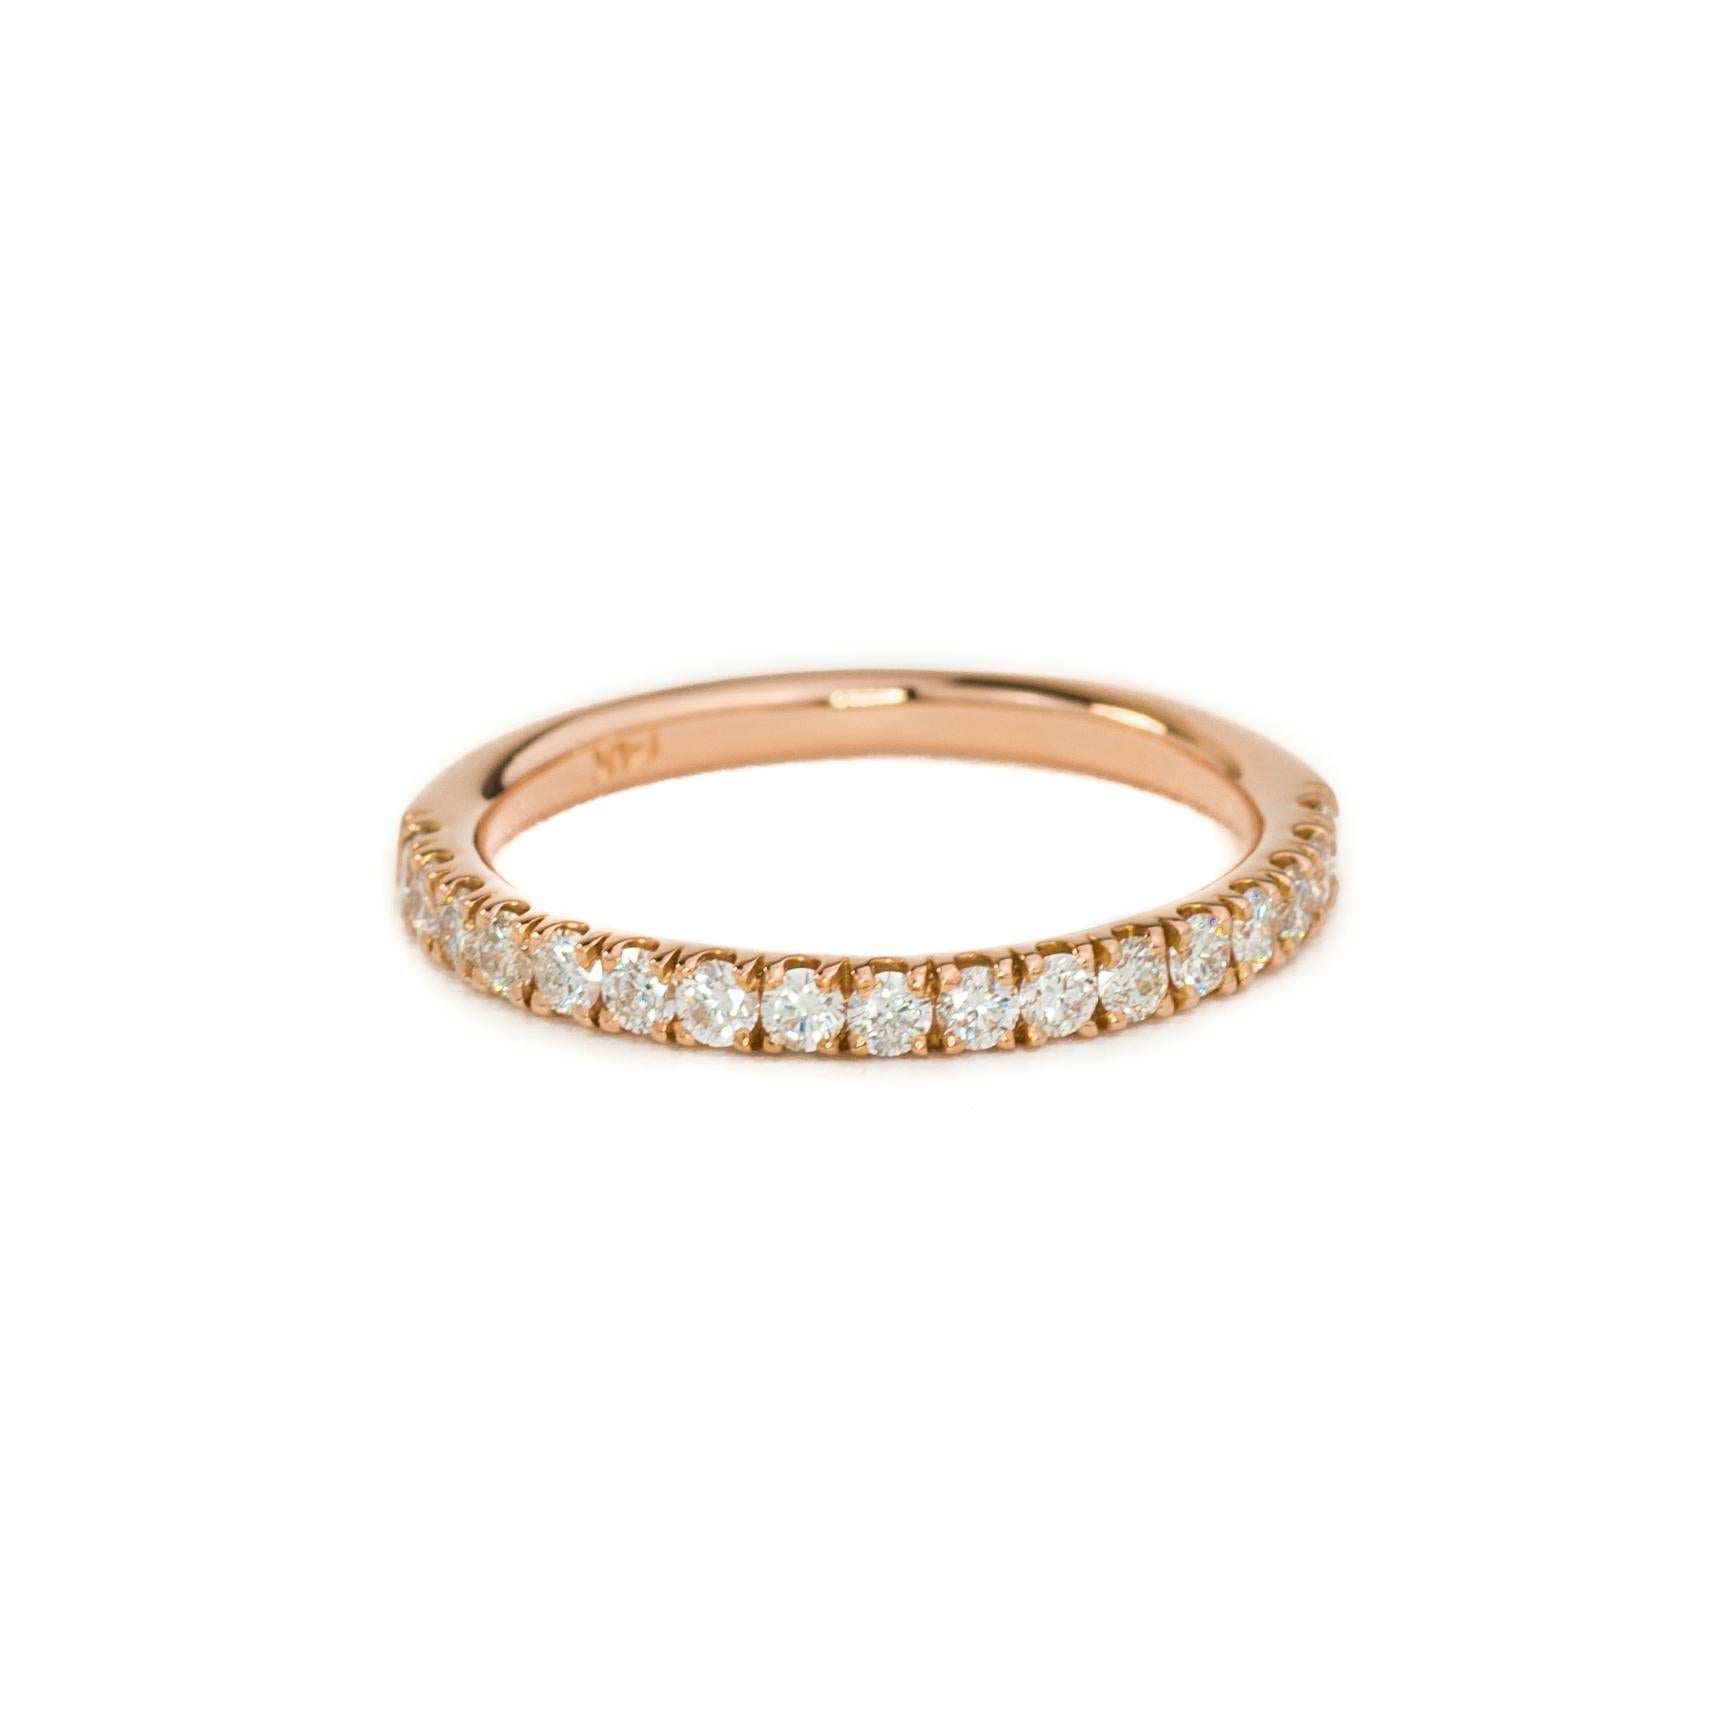 This dainty diamond half eternity band is perfect as a wedding band, wearing alone or stacking. This band will match with many of the engagement rings.

This is a custom made to order ring. Please allow 3-4 weeks for delivery.

Your 14k gold color